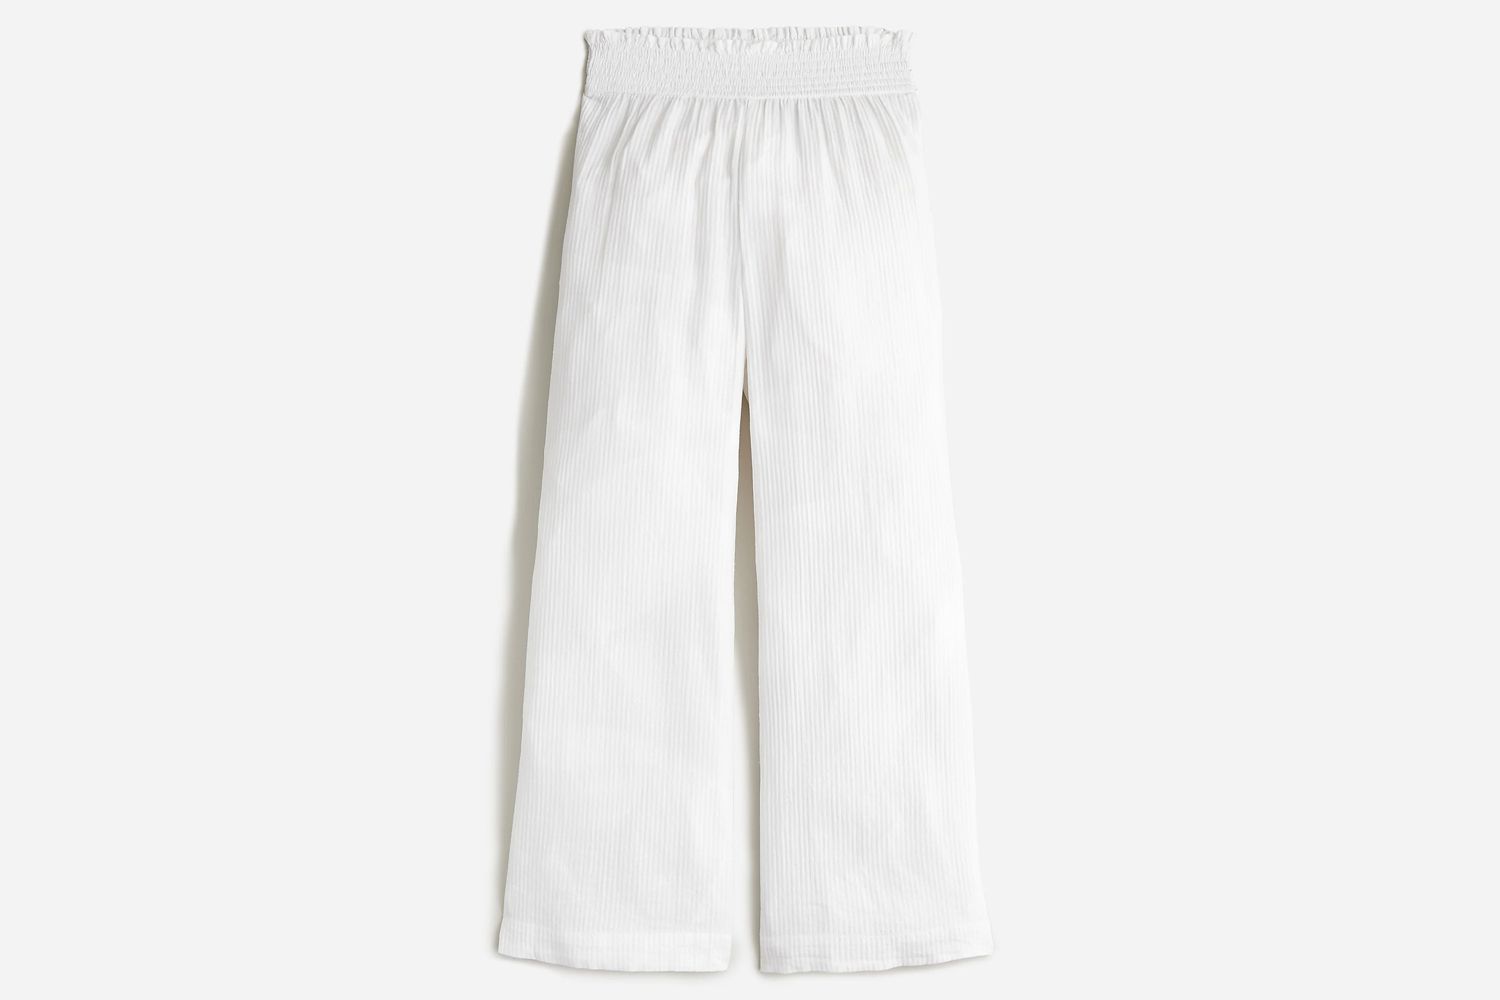 j·Relaxed Beach Pant in Soft Gauze